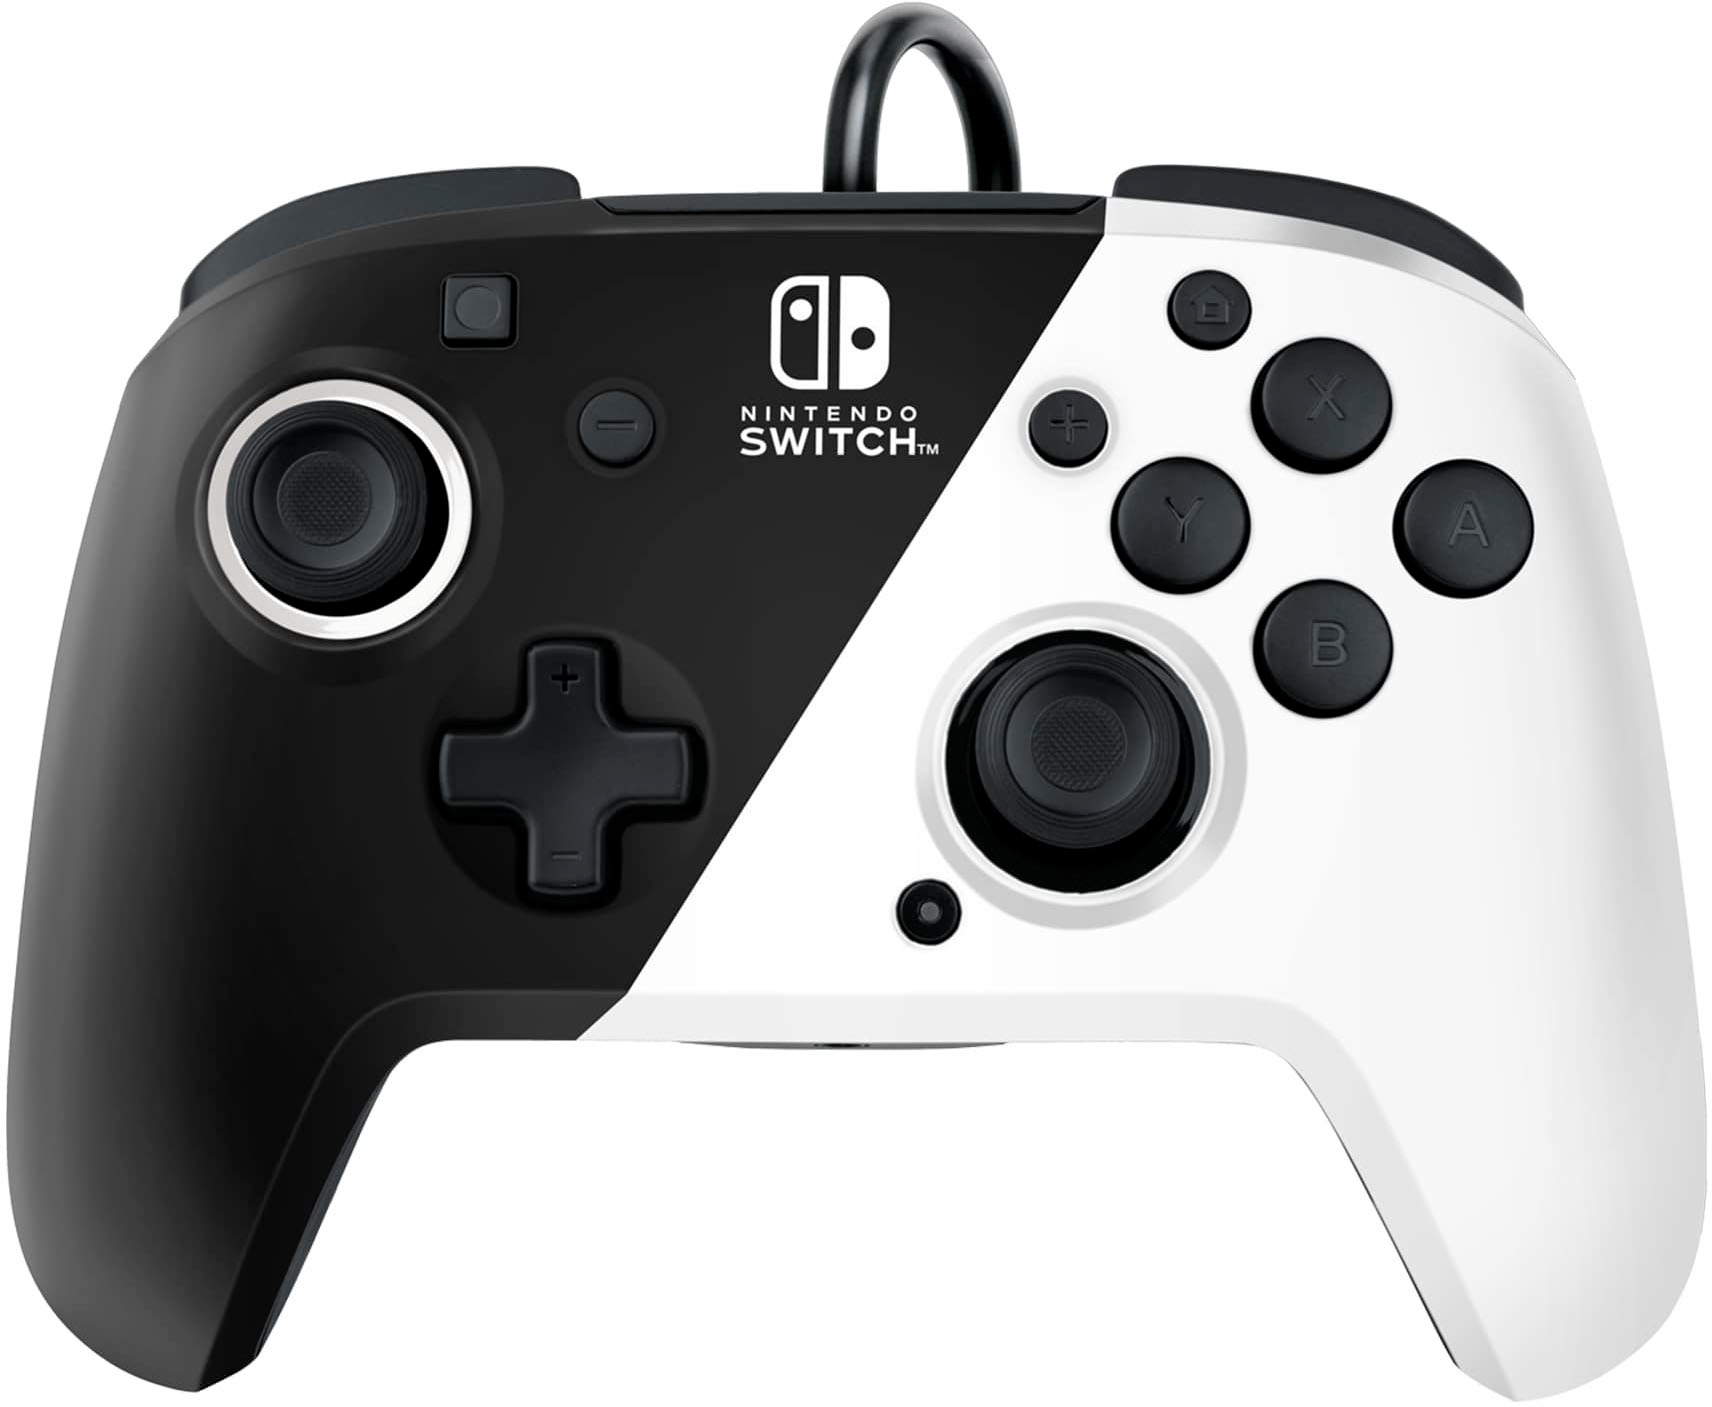 PDP Afterglow Wave Wireless Controller: White for Nintendo Switch, Nintendo Switch - OLED Model